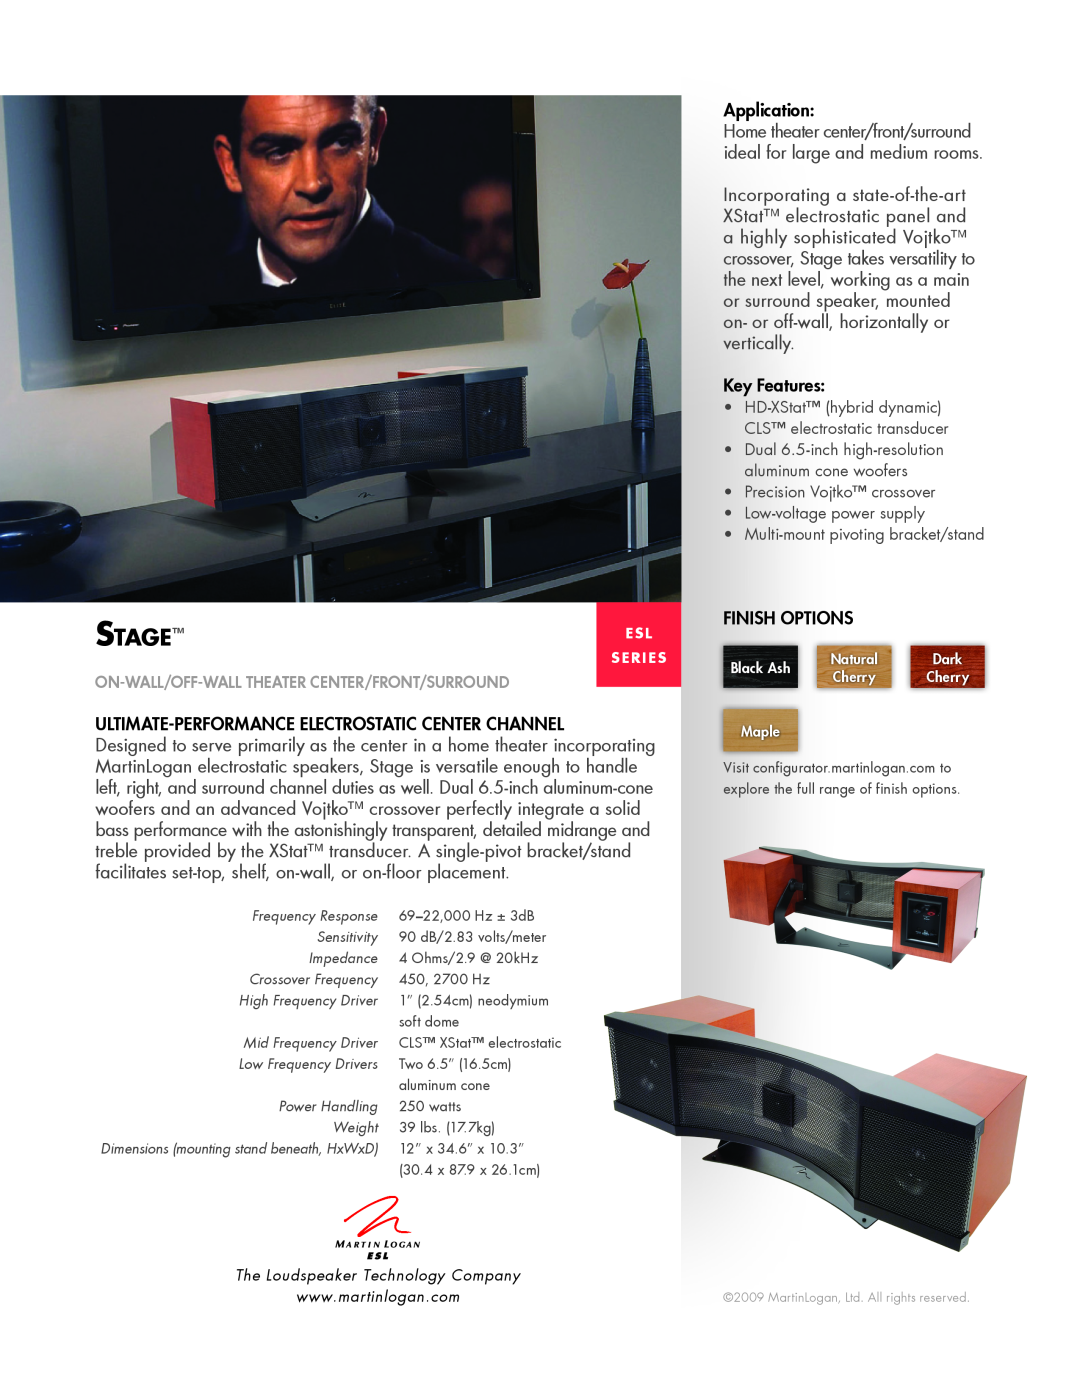 MartinLogan ESL Series dimensions Depth, Deep, Powerful, and Detailed, Application, Key Features, Finish options, ±10dB 